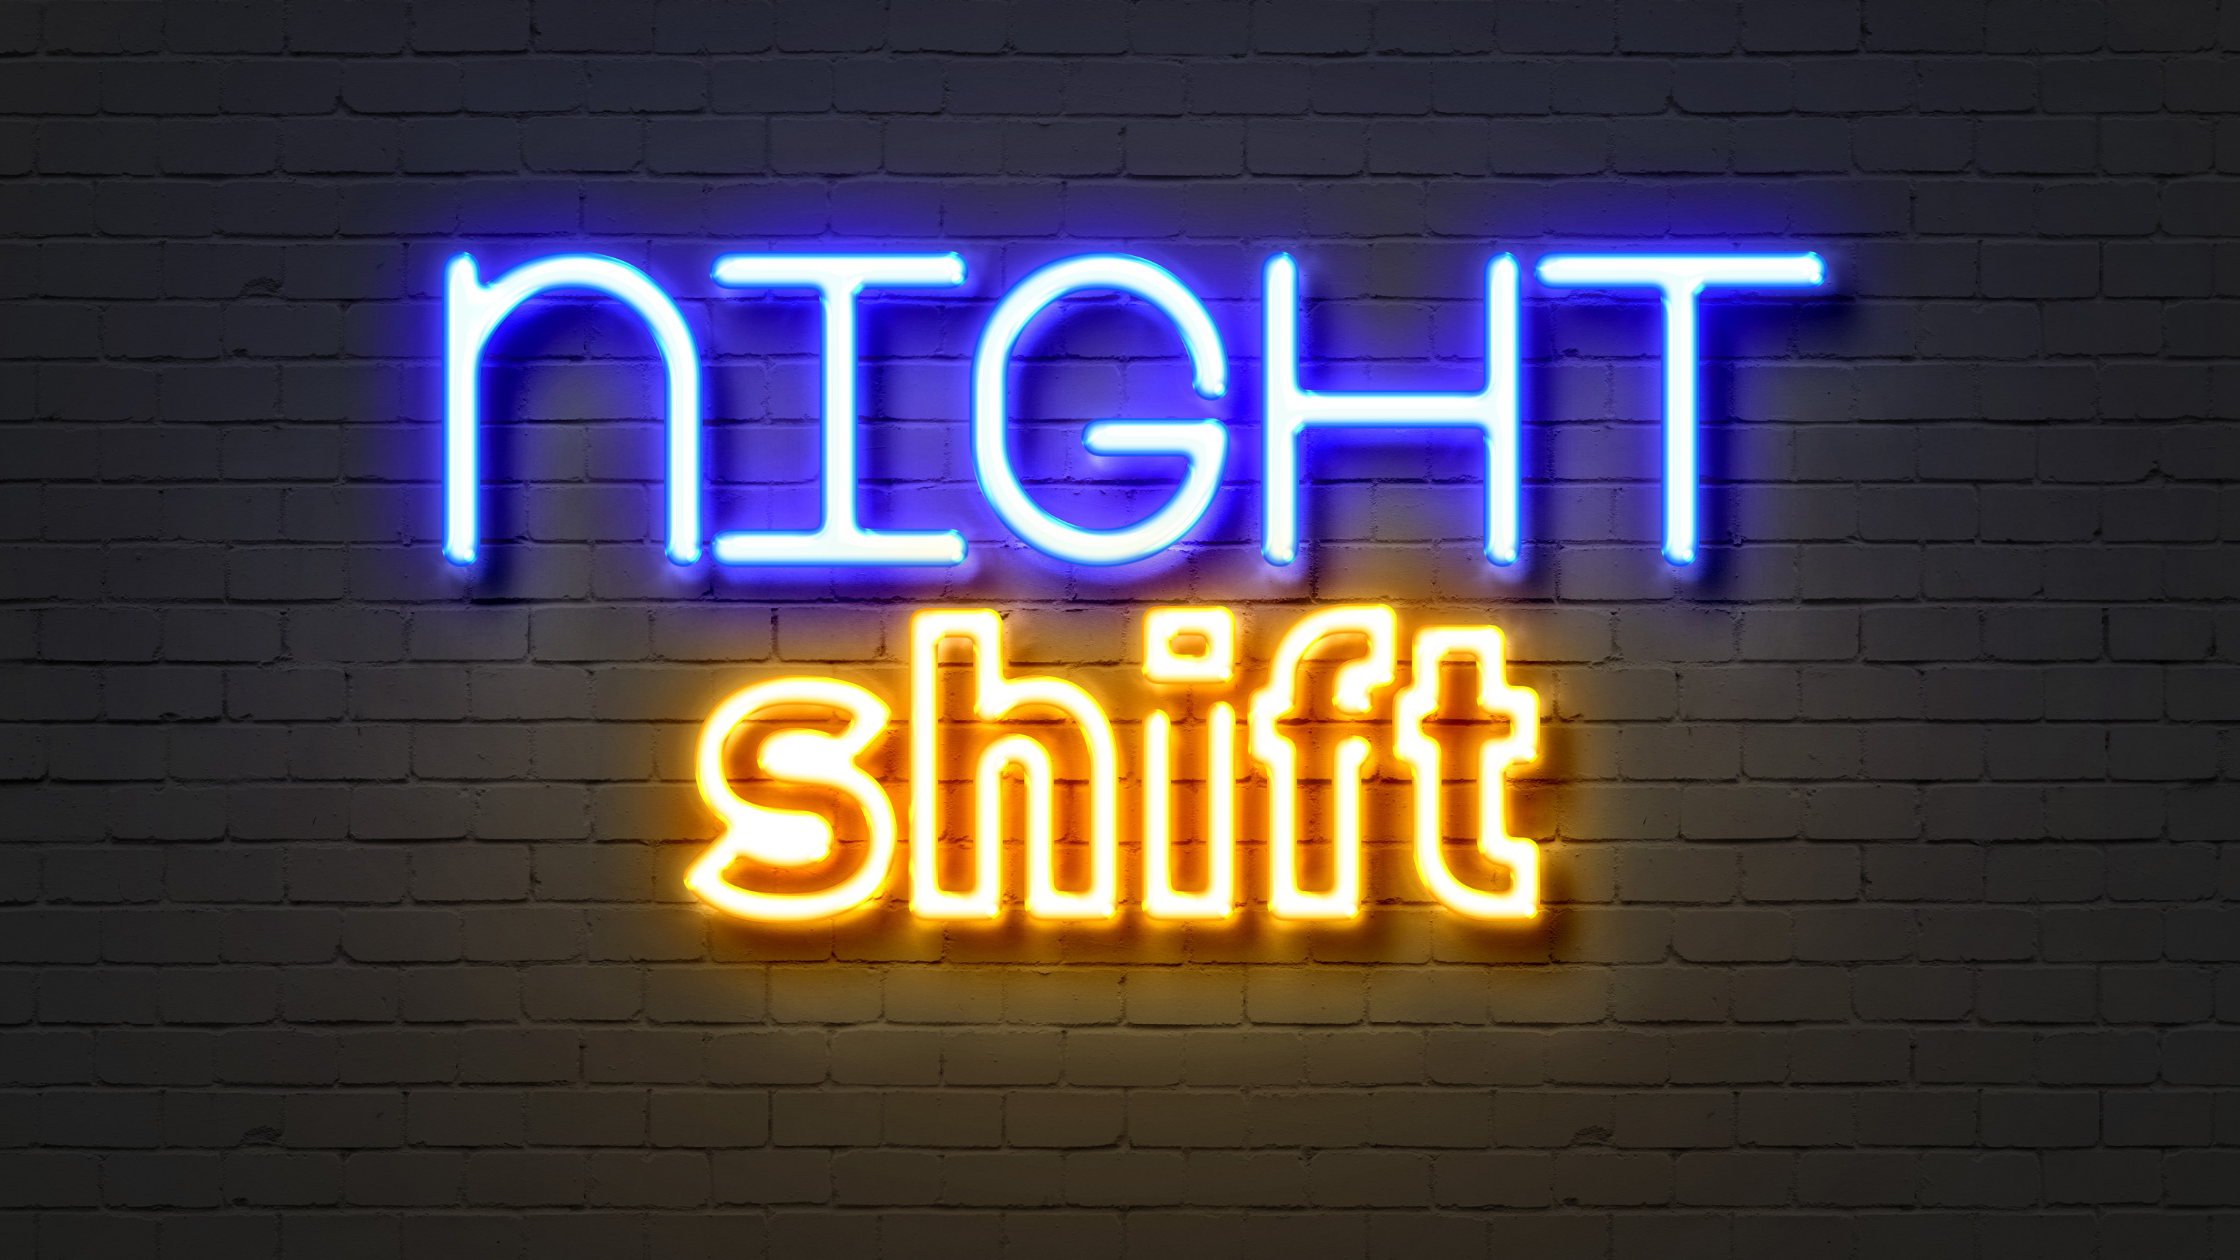 9 Benefits of Working the Night Shift